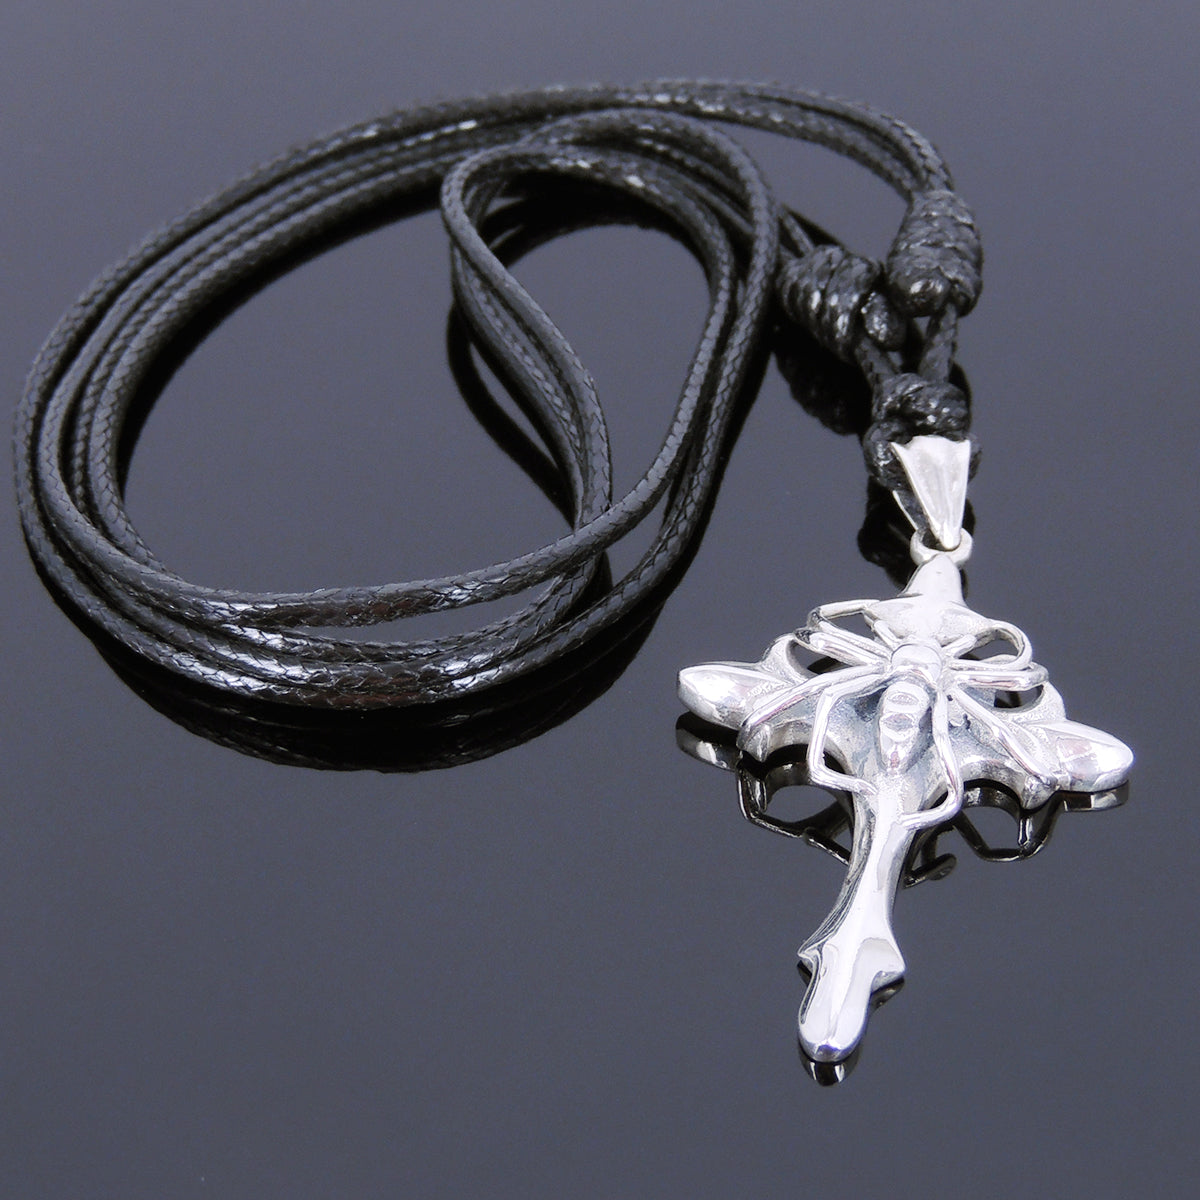 Gothic Cross Spider Pendant Necklace for Men Women Fashion Jewelry